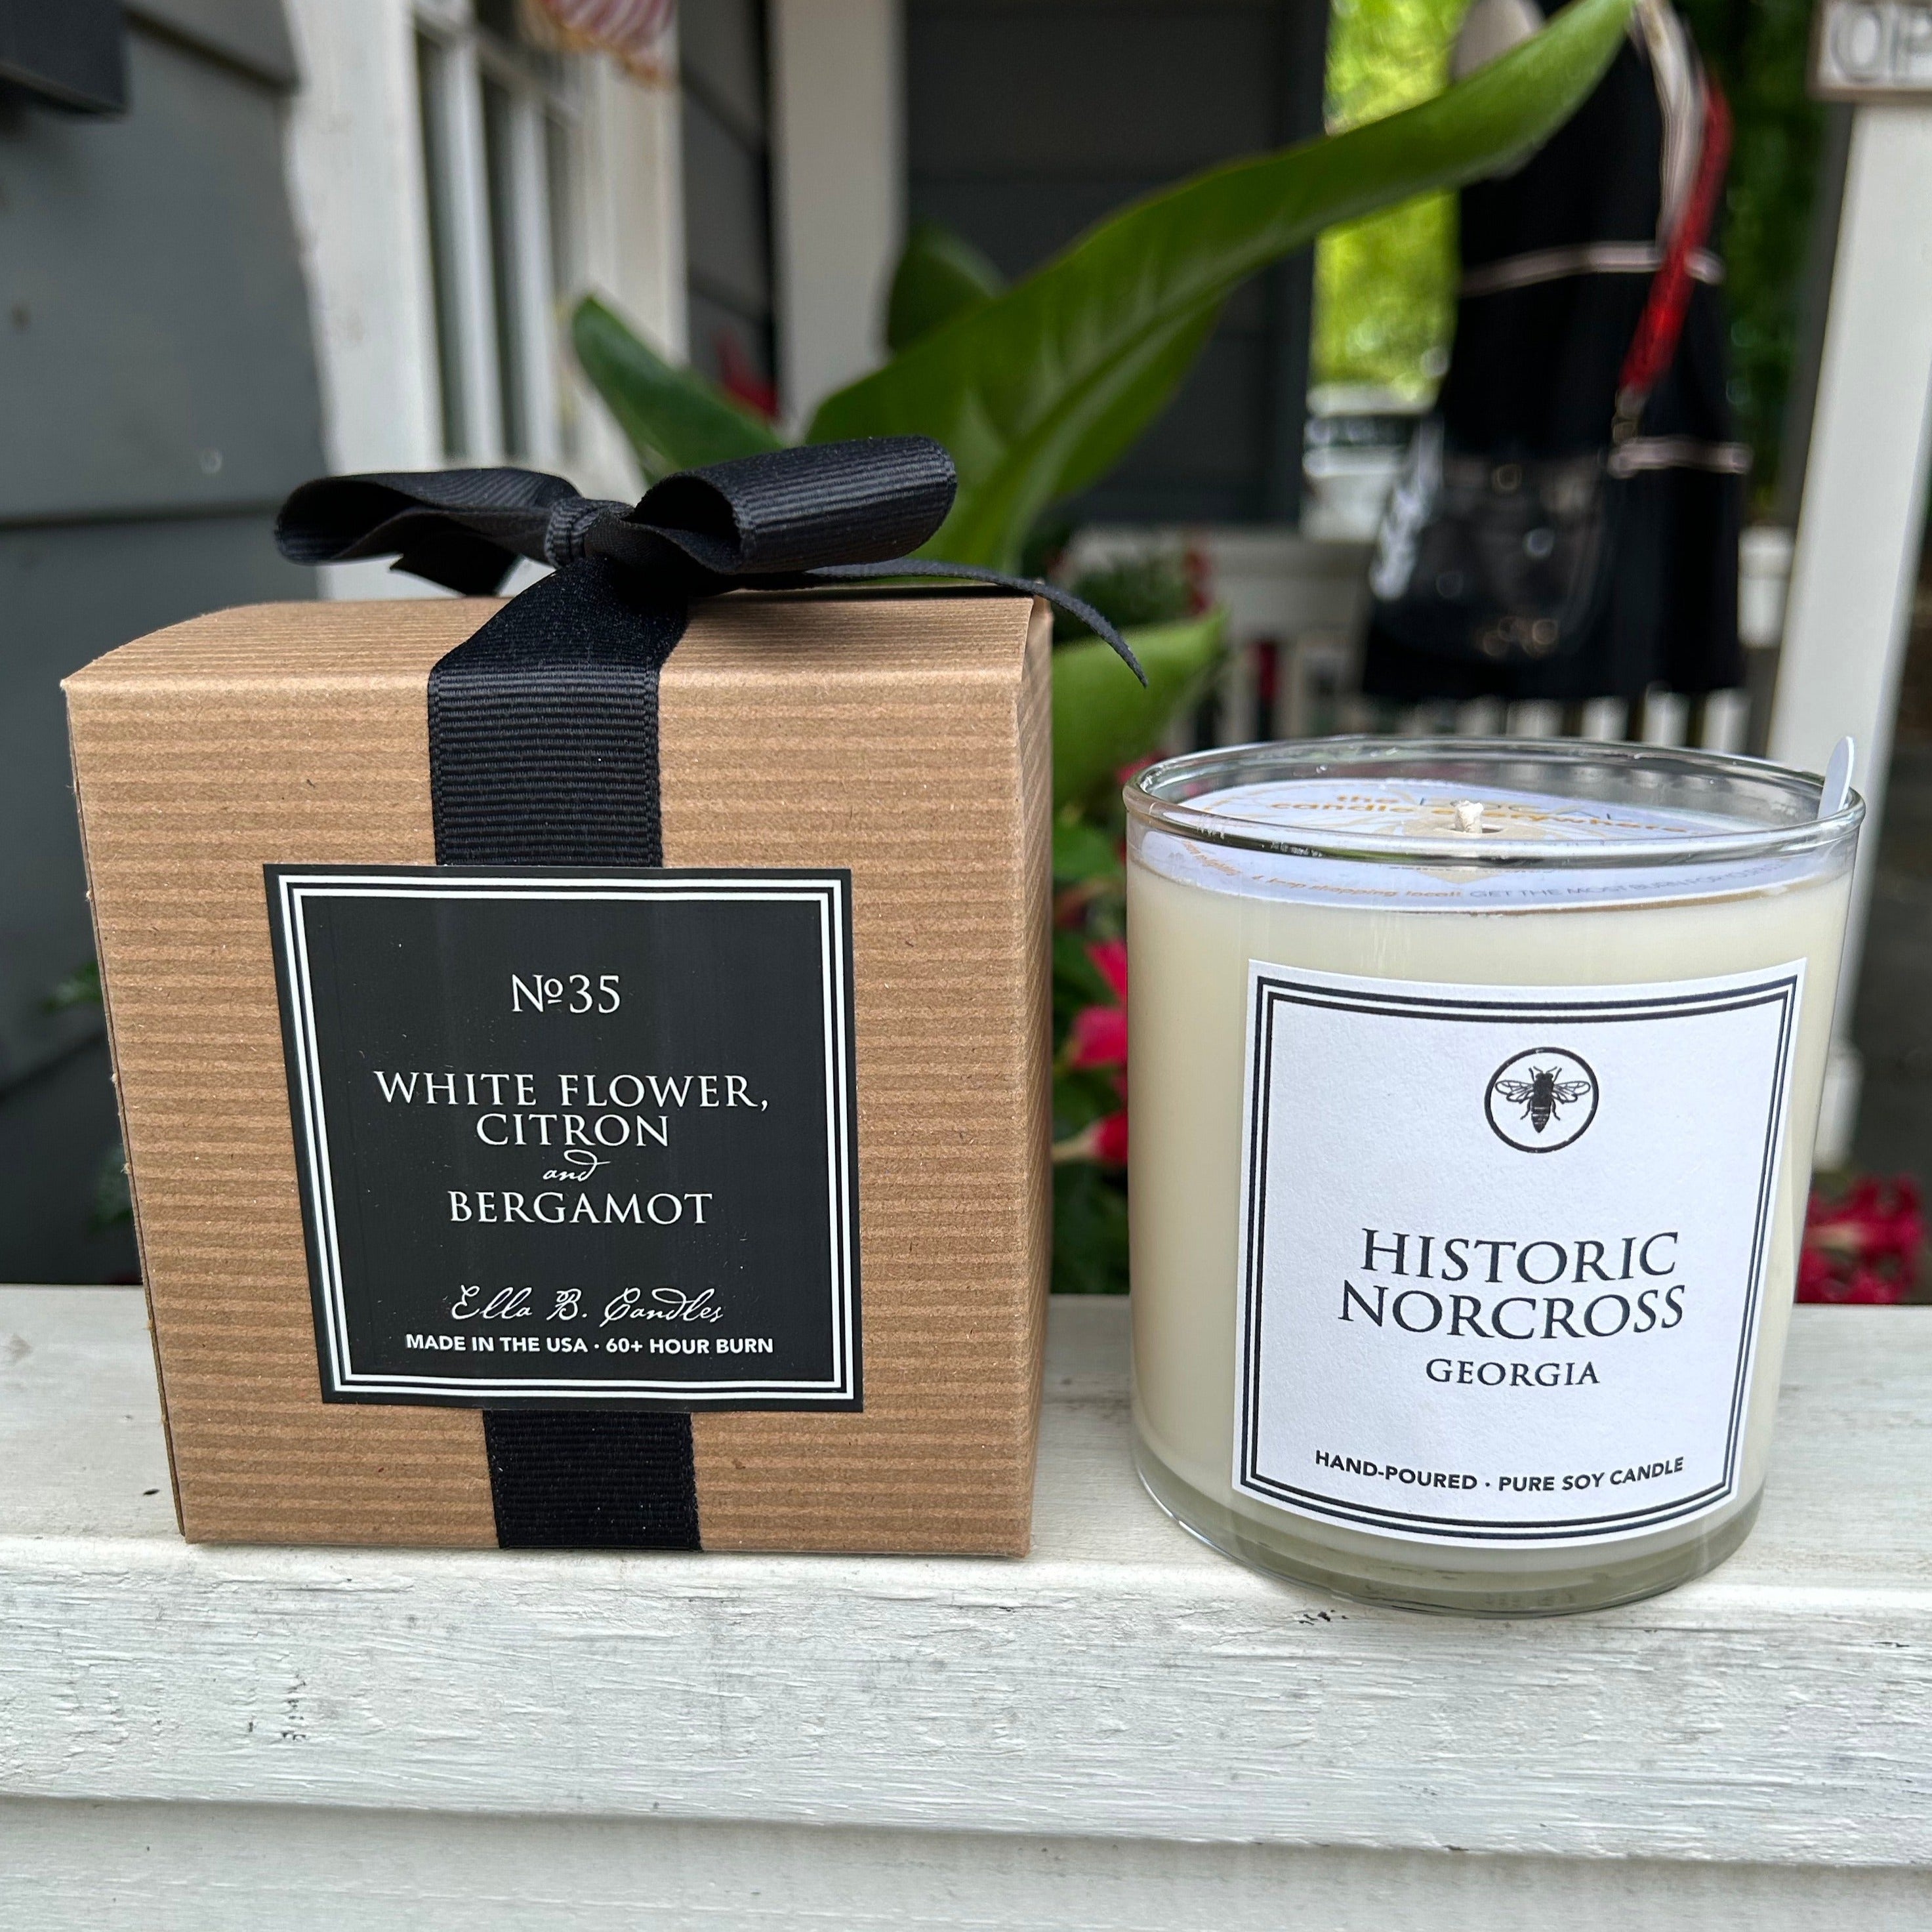 Theme Hand-Poured Soy Candles